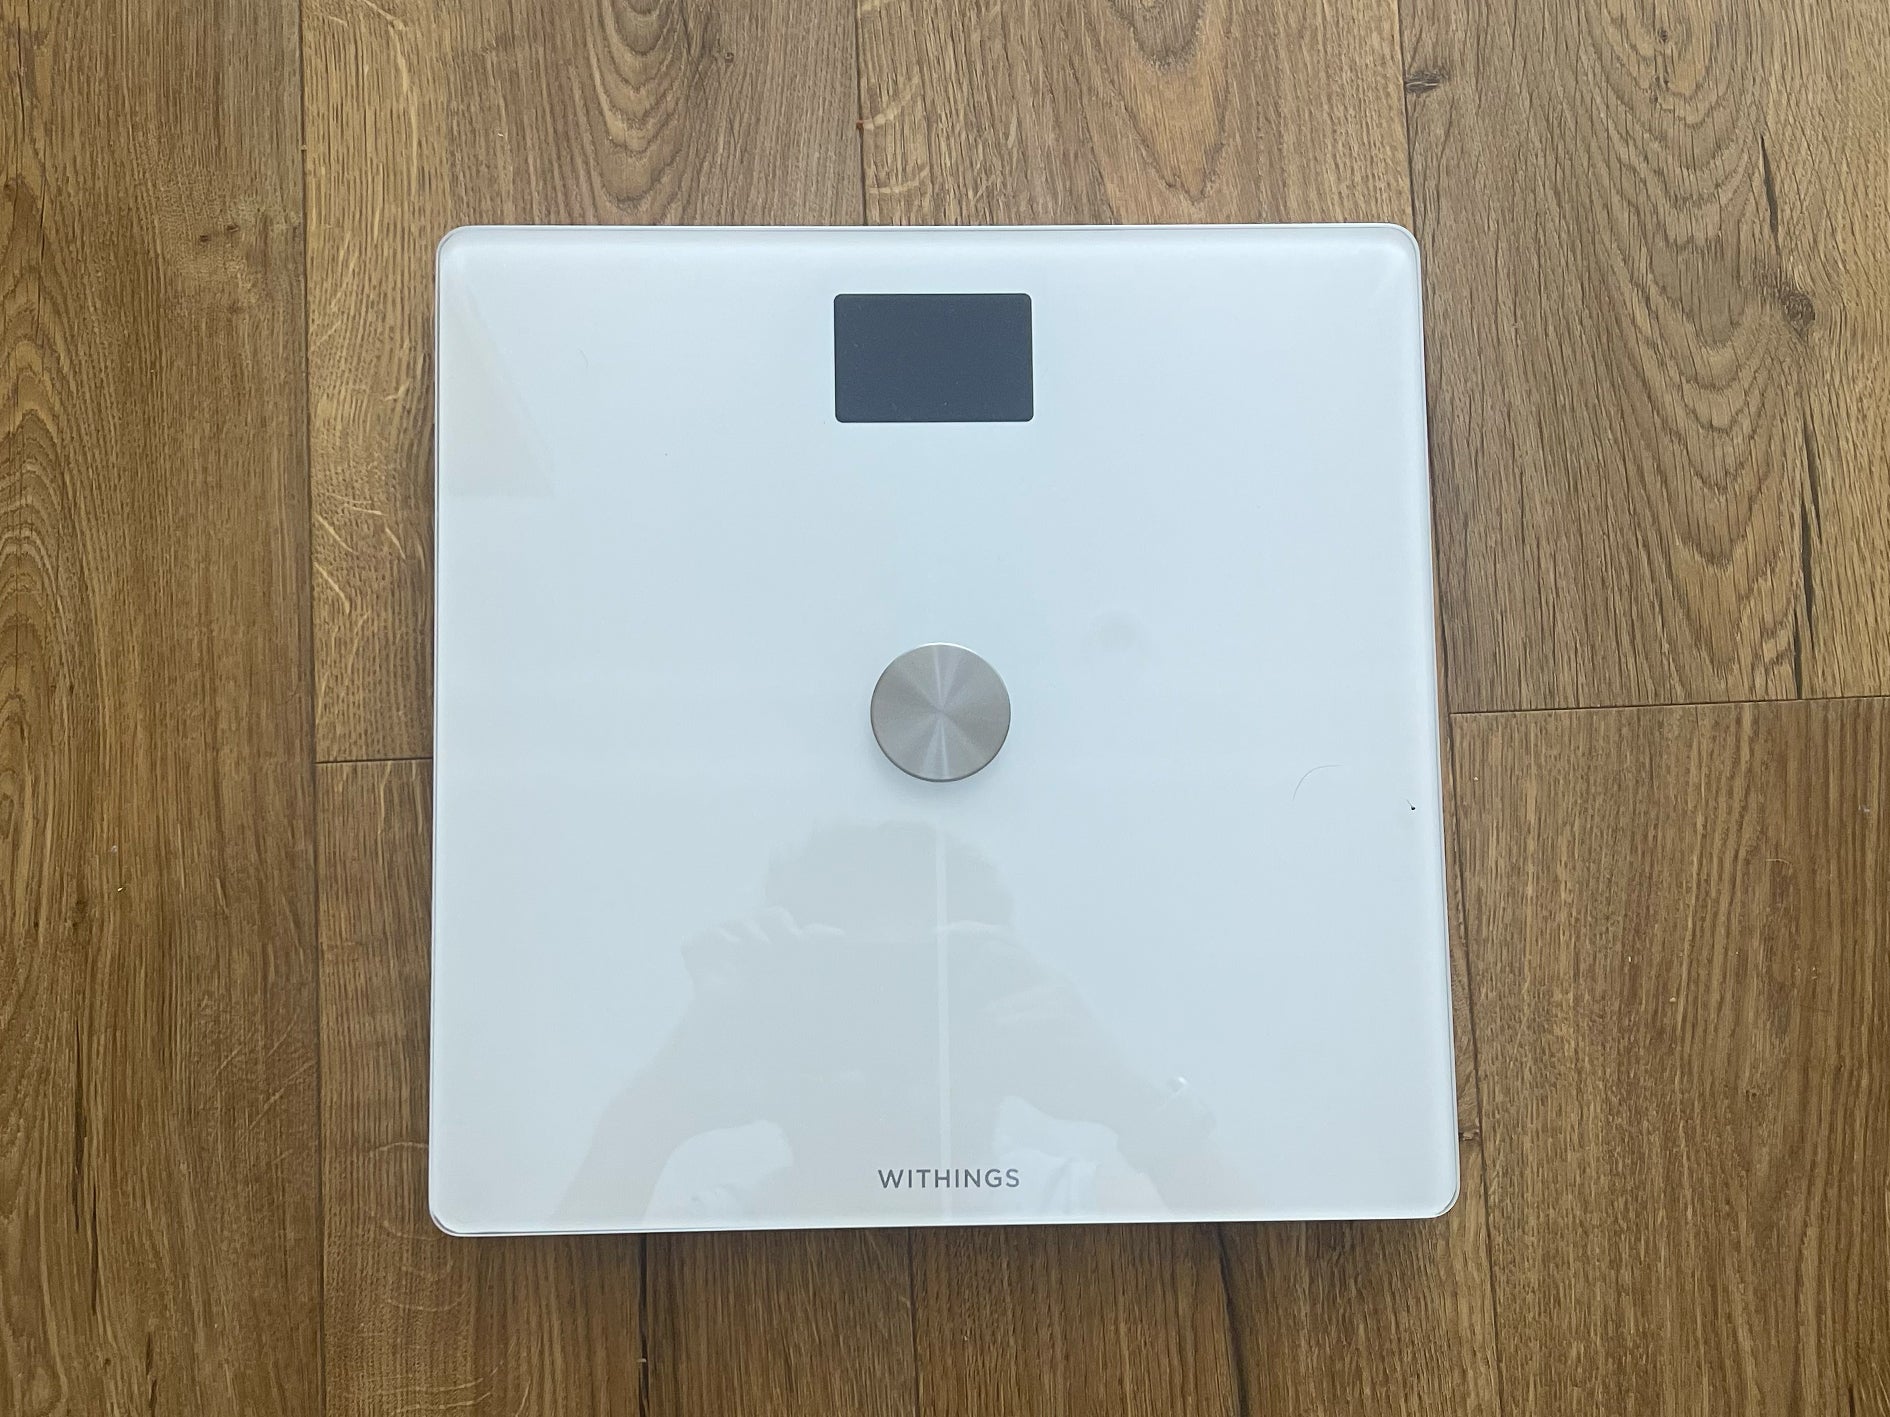 https://static.independent.co.uk/2023/06/12/13/withings%20smart%20scale.jpg